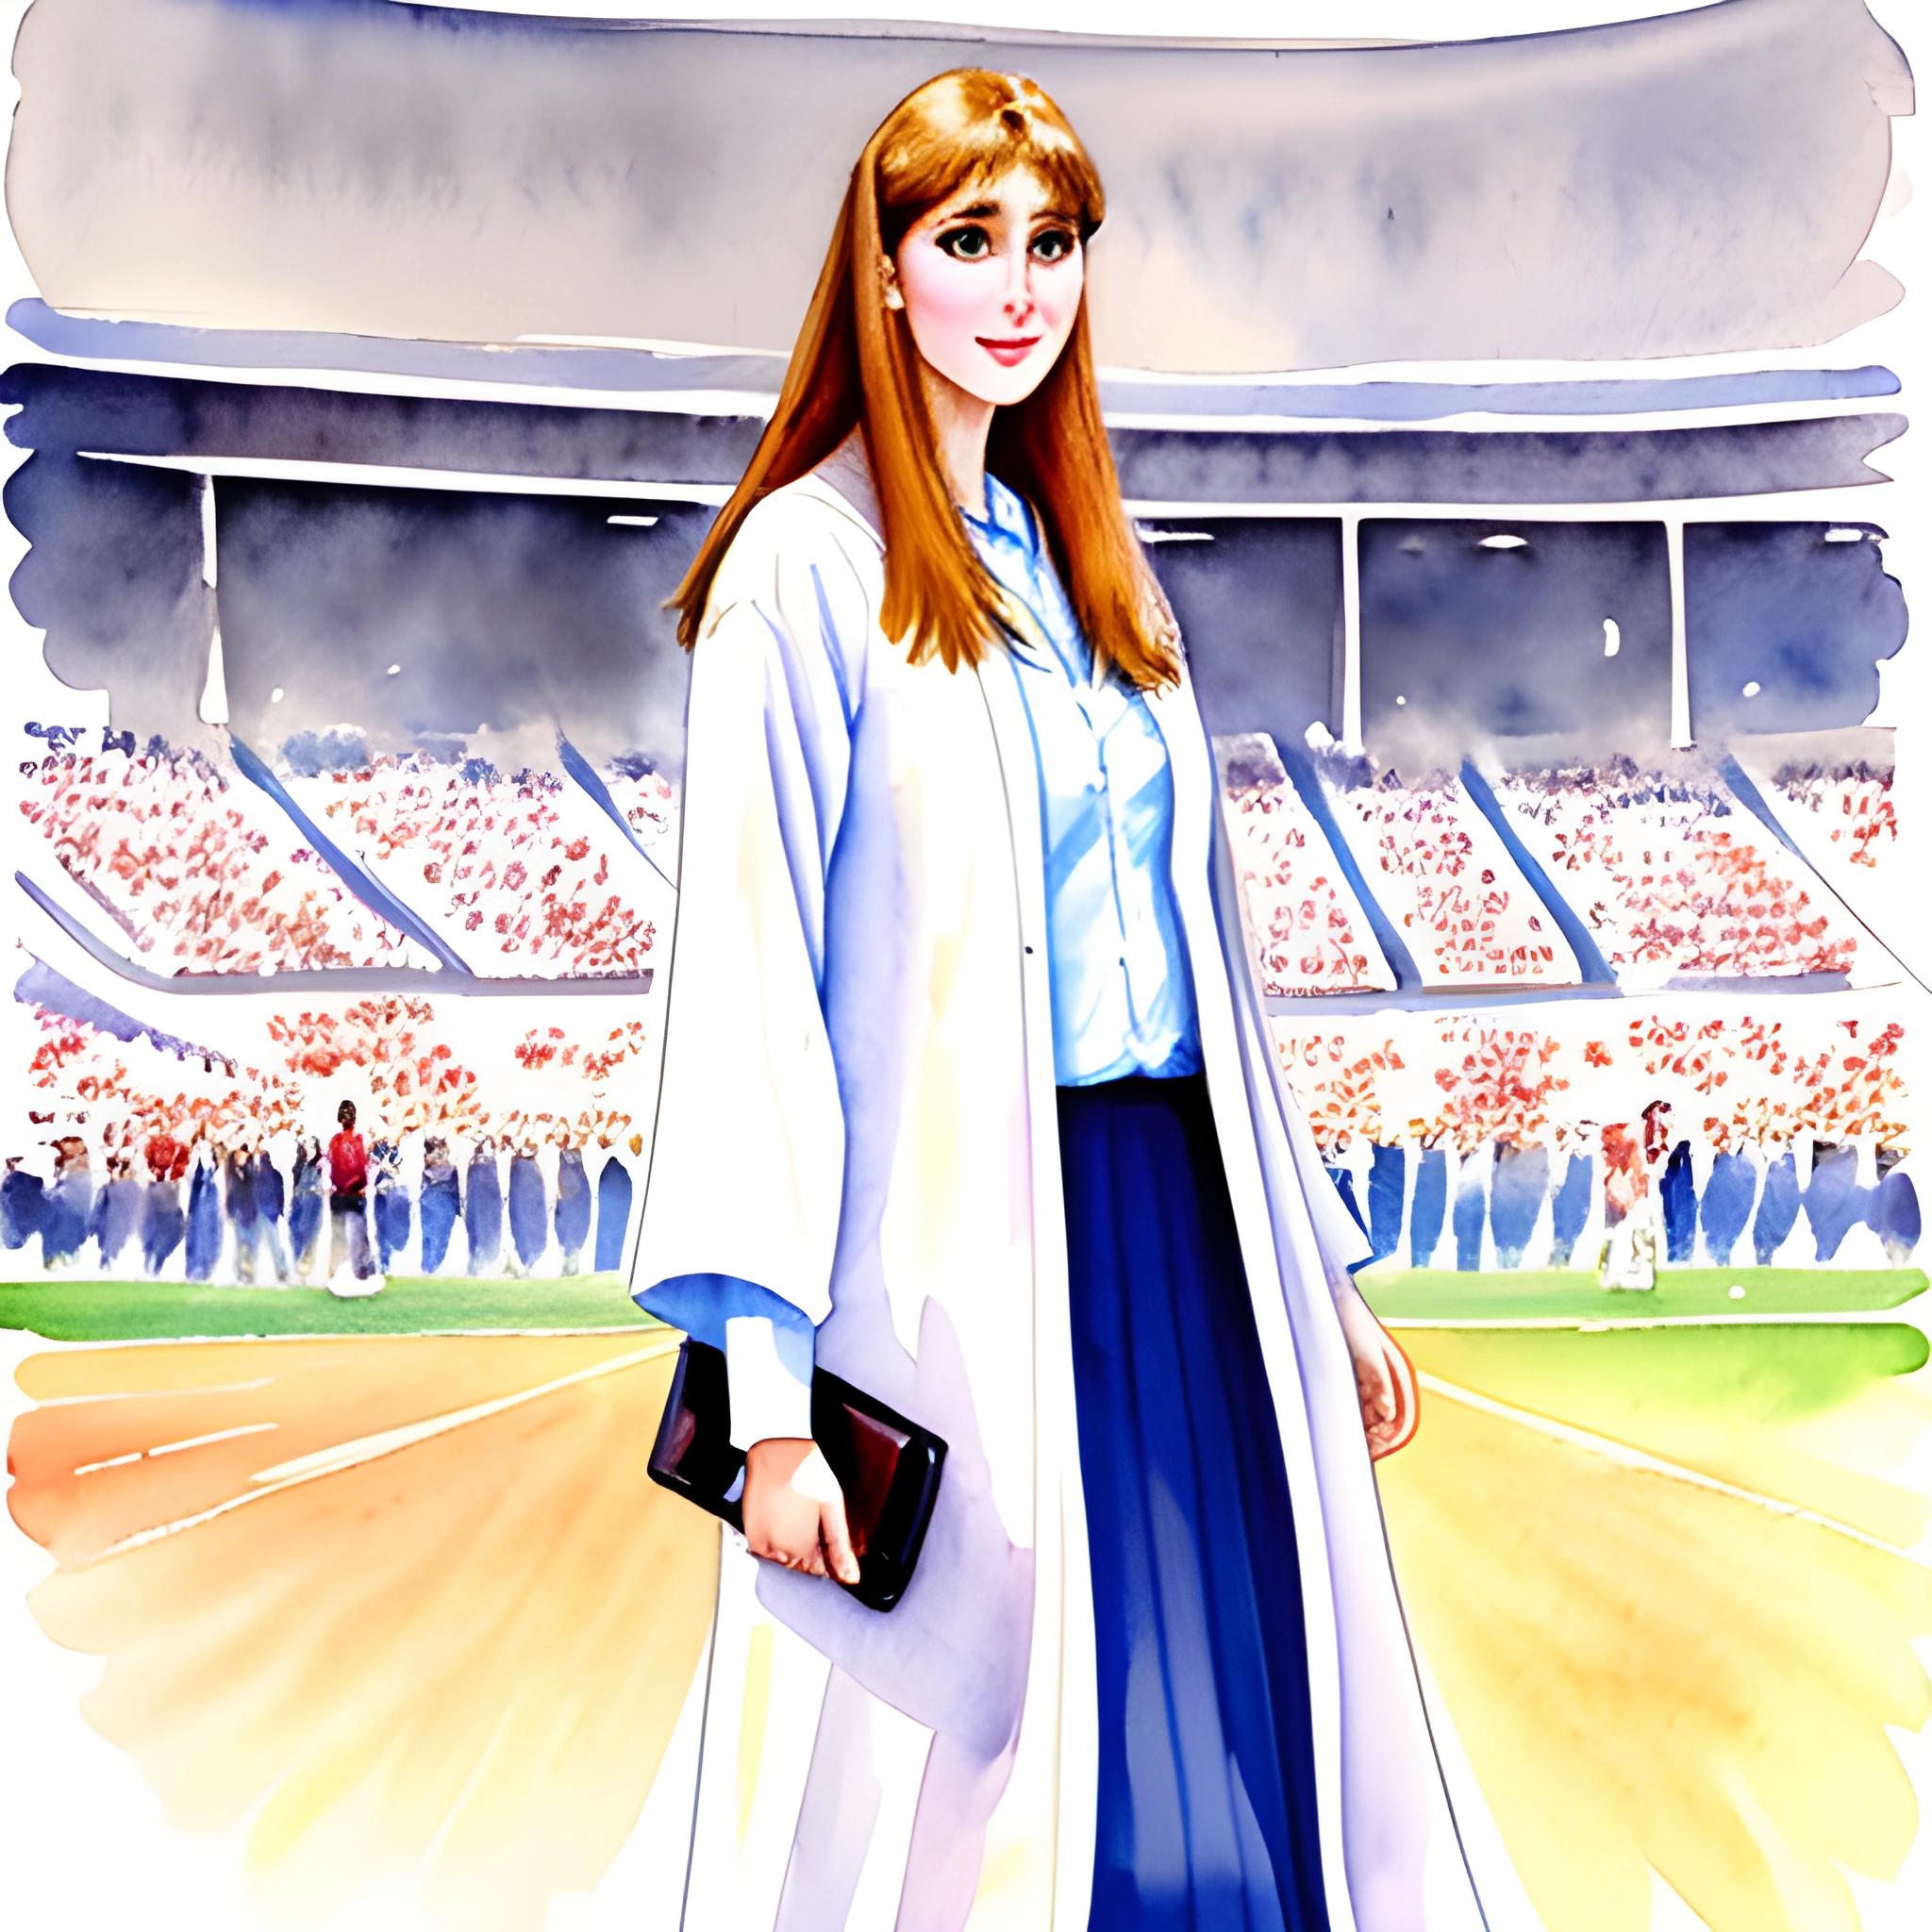 painting of a woman in a white coat and blue skirt standing in a stadium